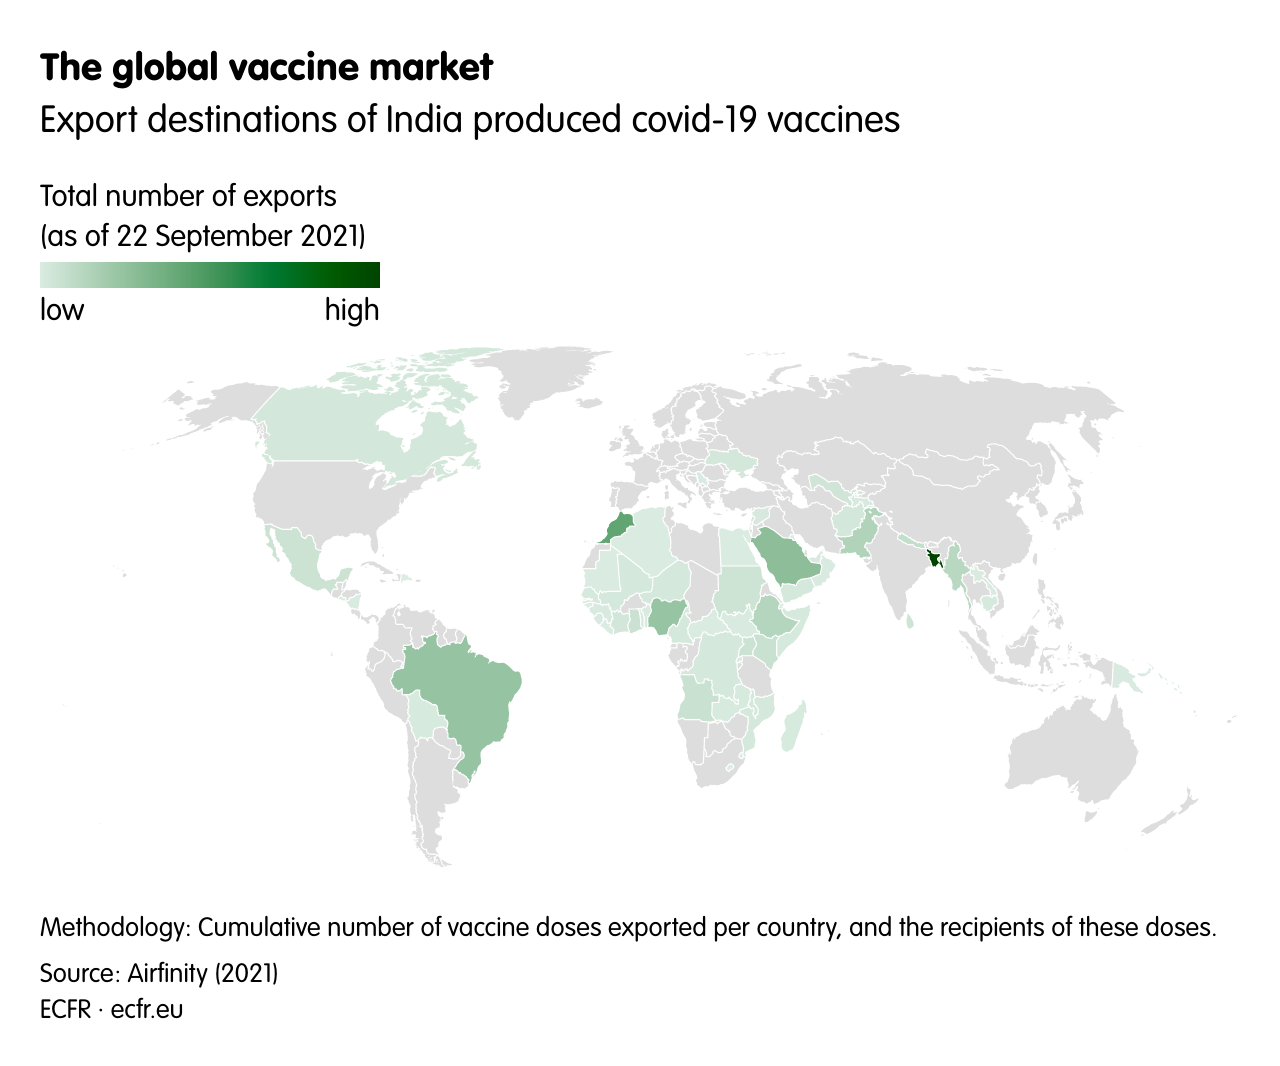 The global vaccine market